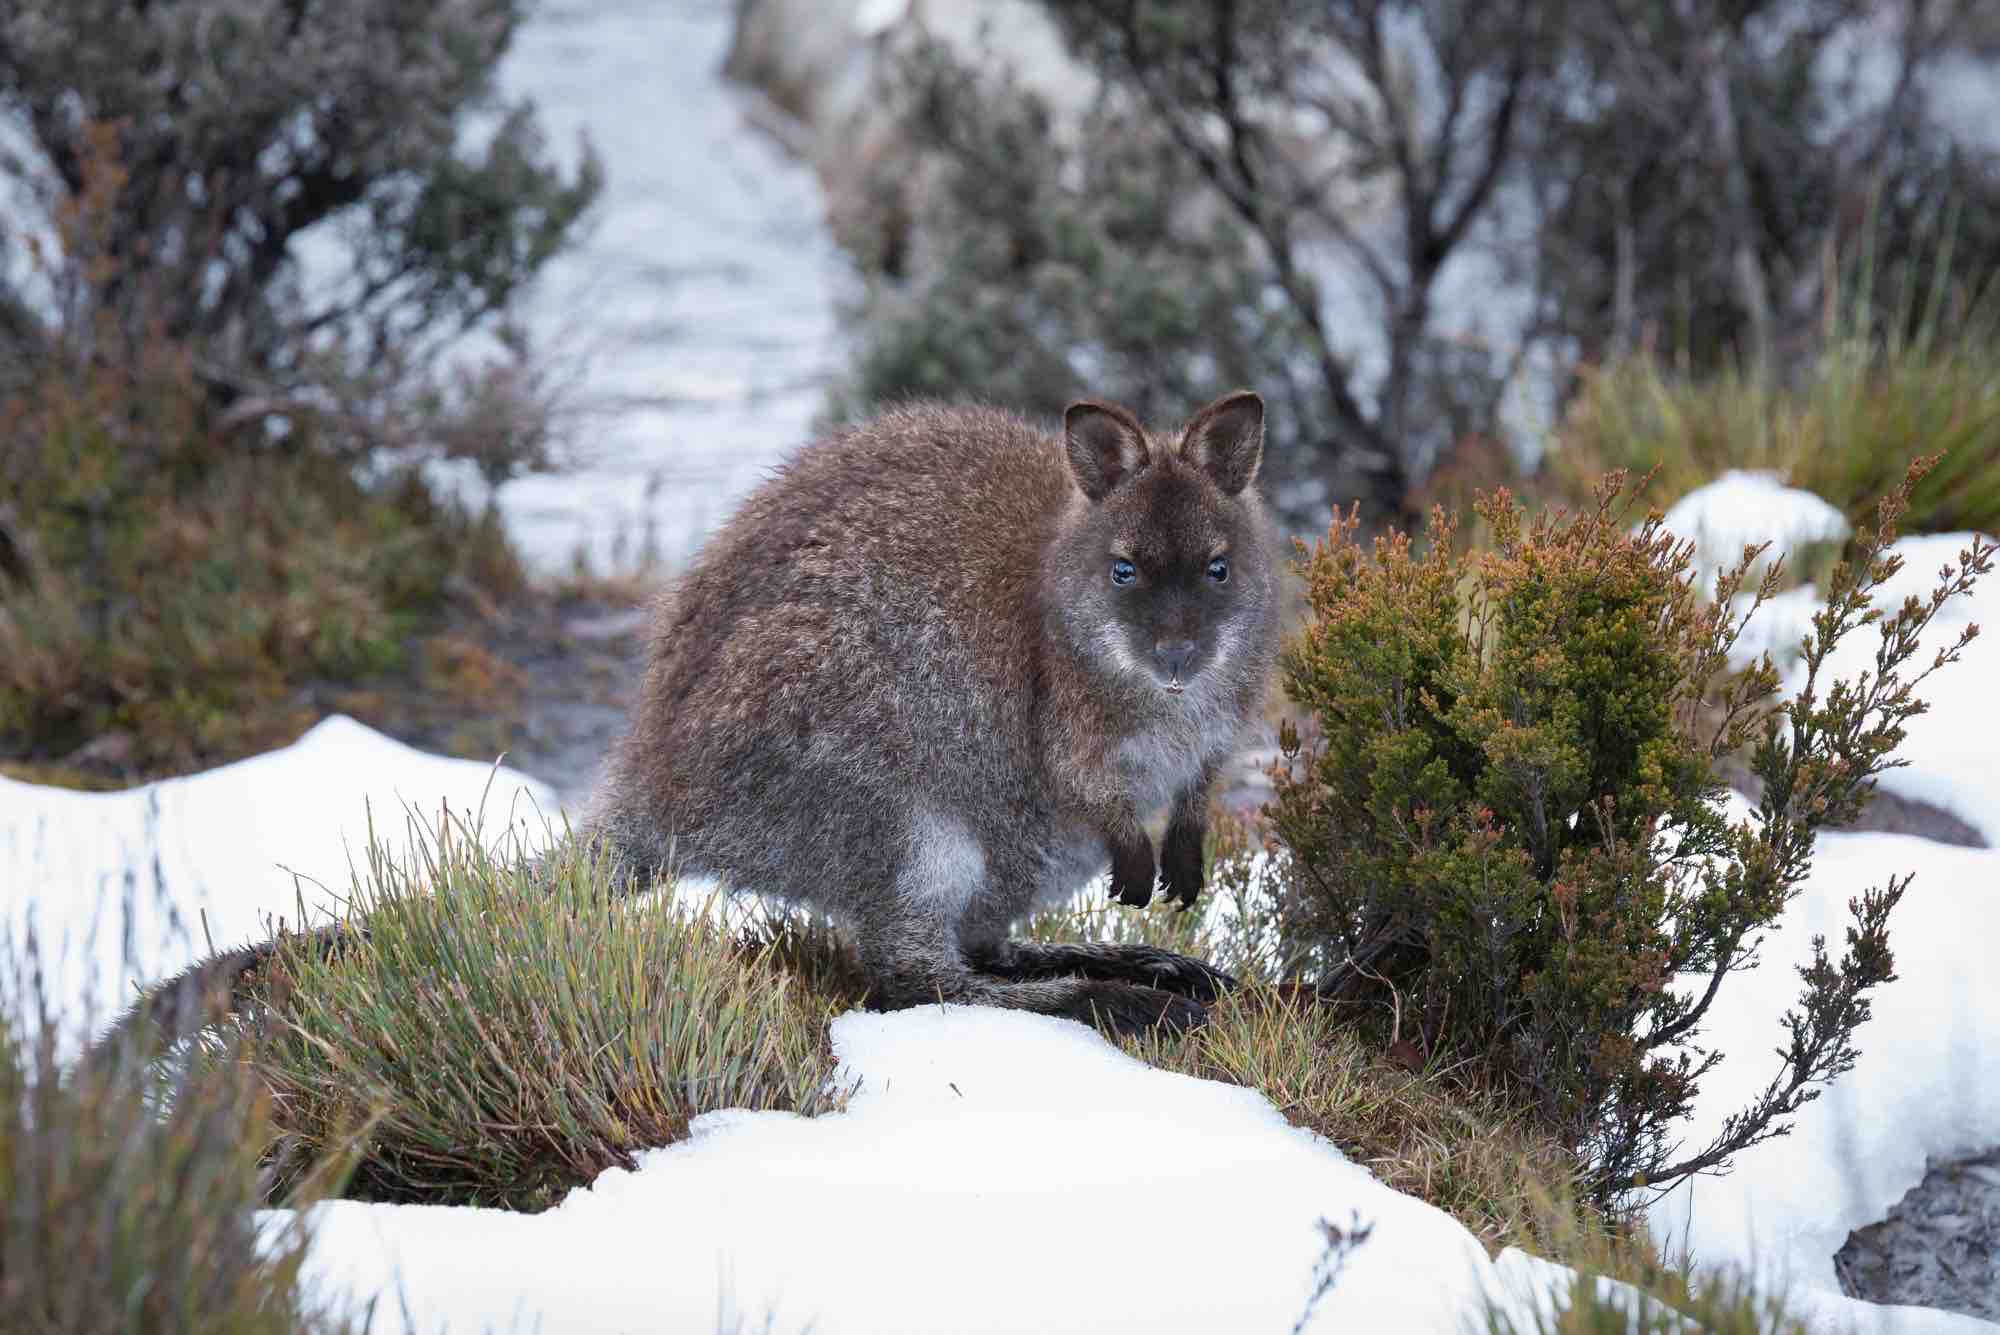 A wallaby in the snow in Australia